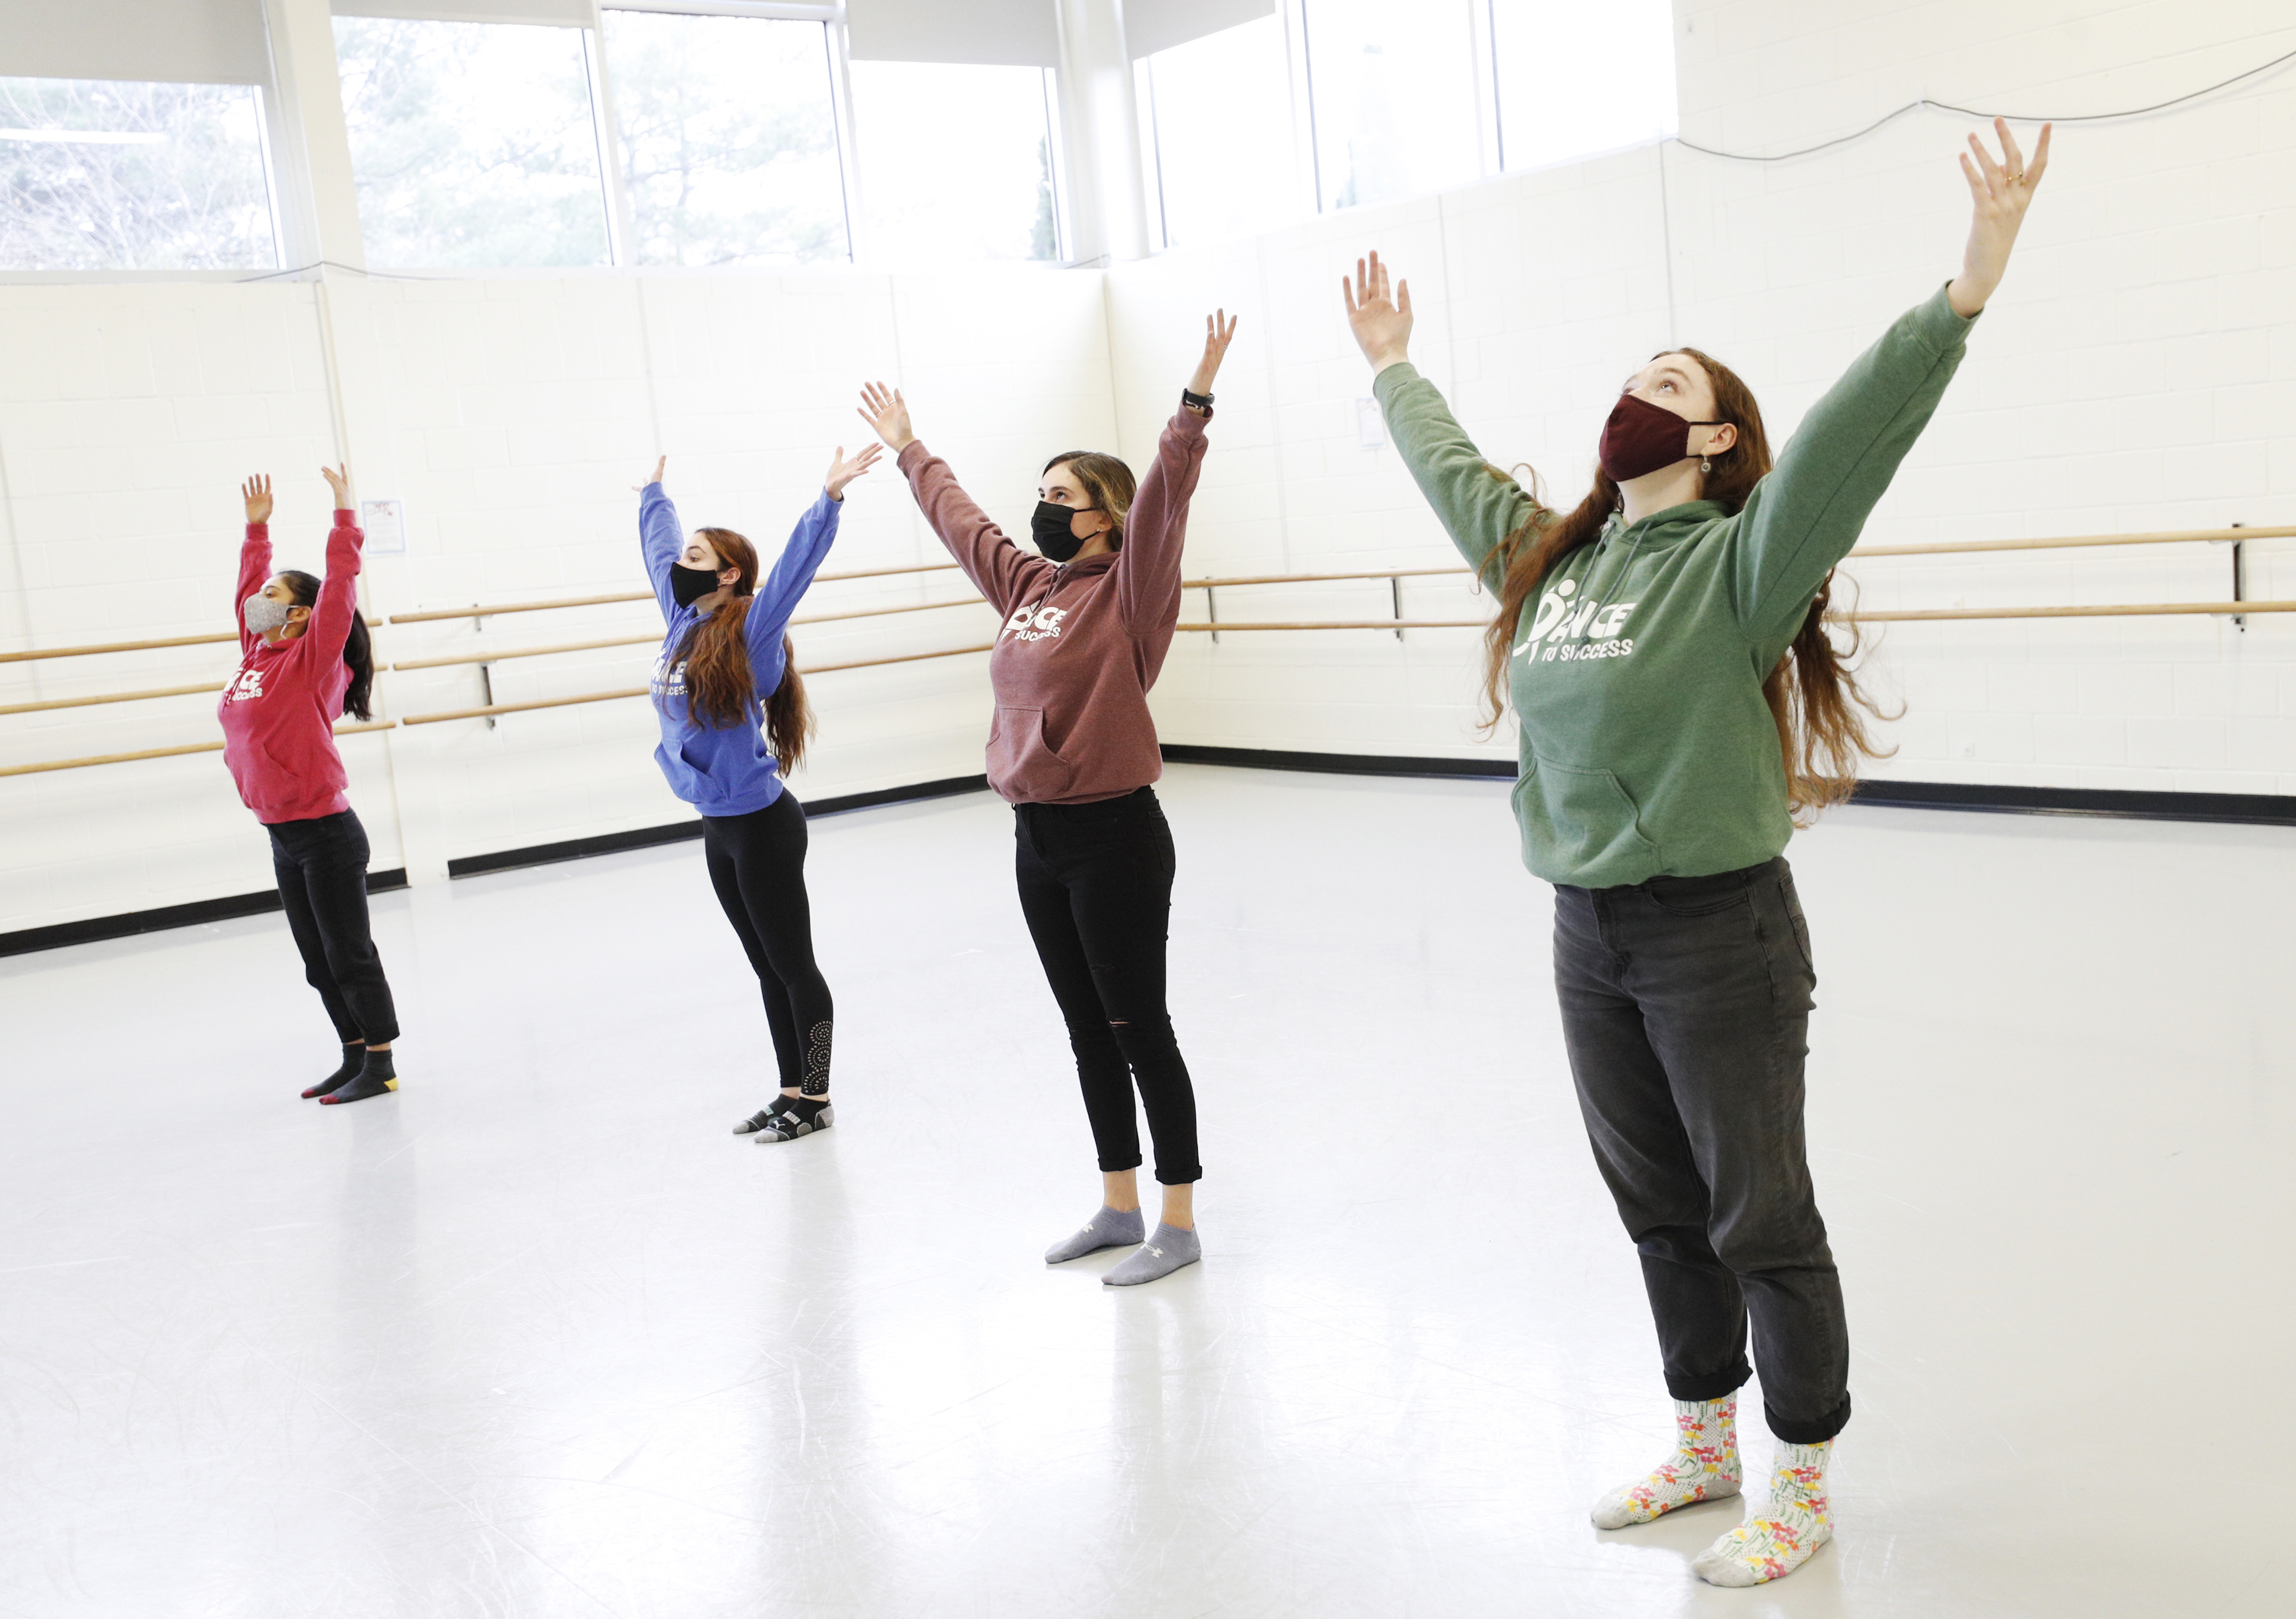 From left, Lea Leventhal ’23, Annika Bergofin ’24, Julianna Willis ’22, and Amanda Francis ’25 practice a dance routine for "Dance to Success."